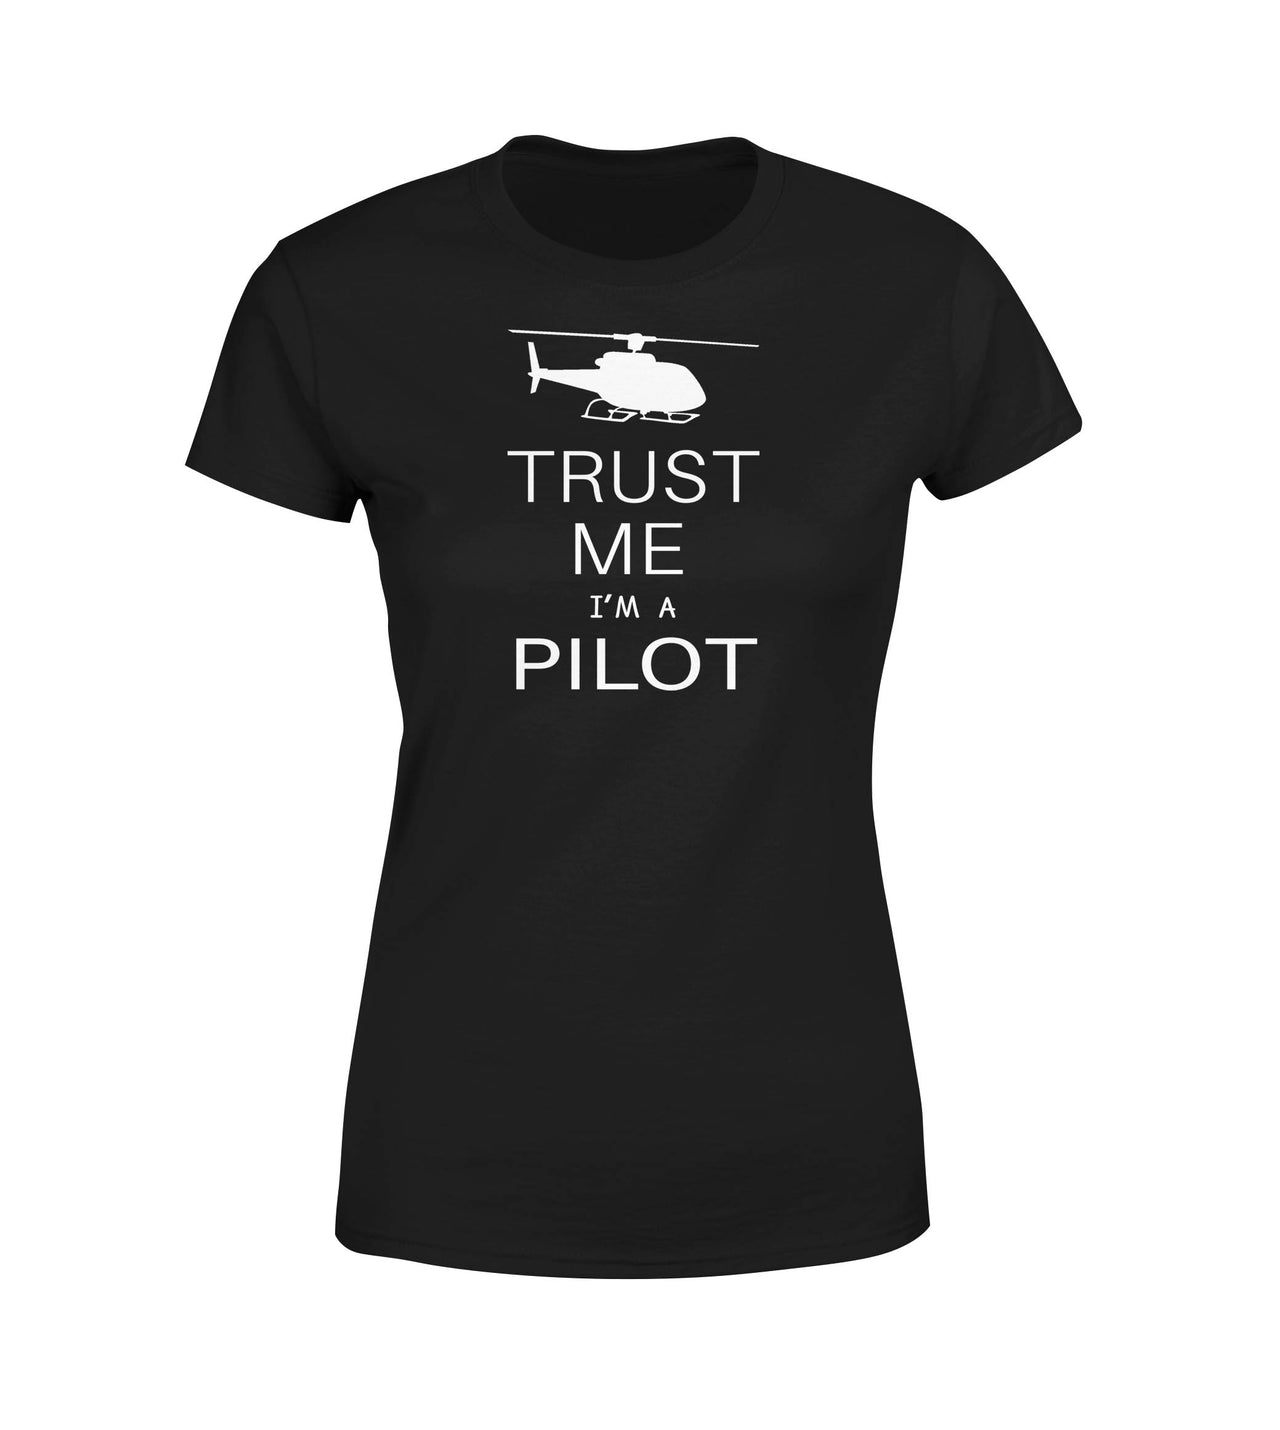 Trust Me I'm a Pilot (Helicopter) Designed Women T-Shirts